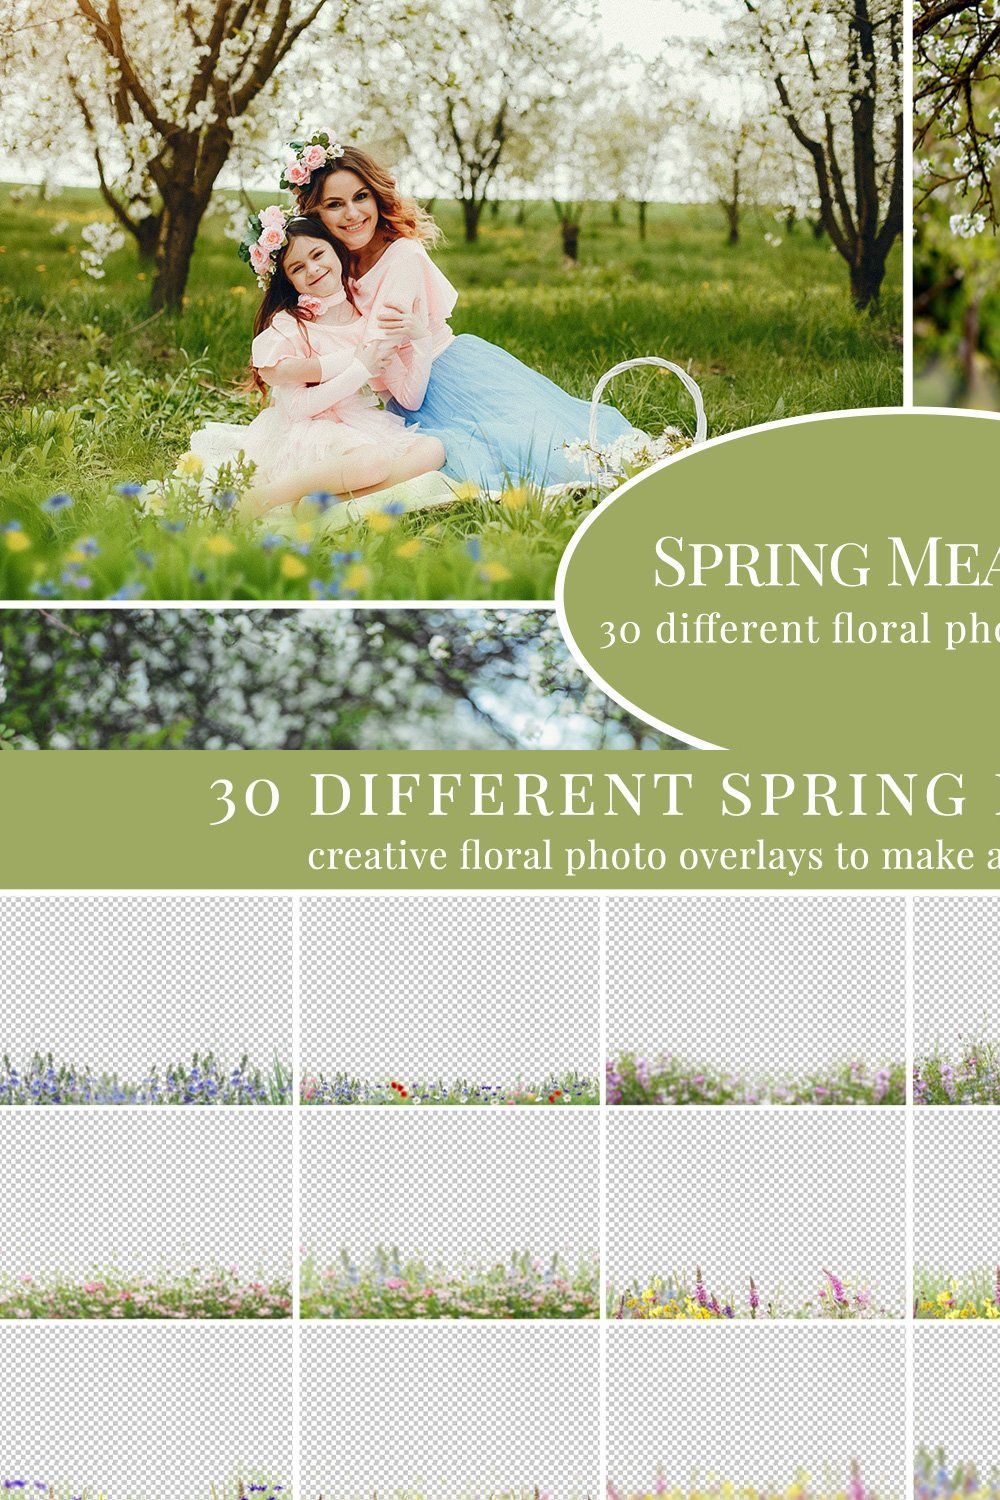 Spring Meadow photo overlays pinterest preview image.